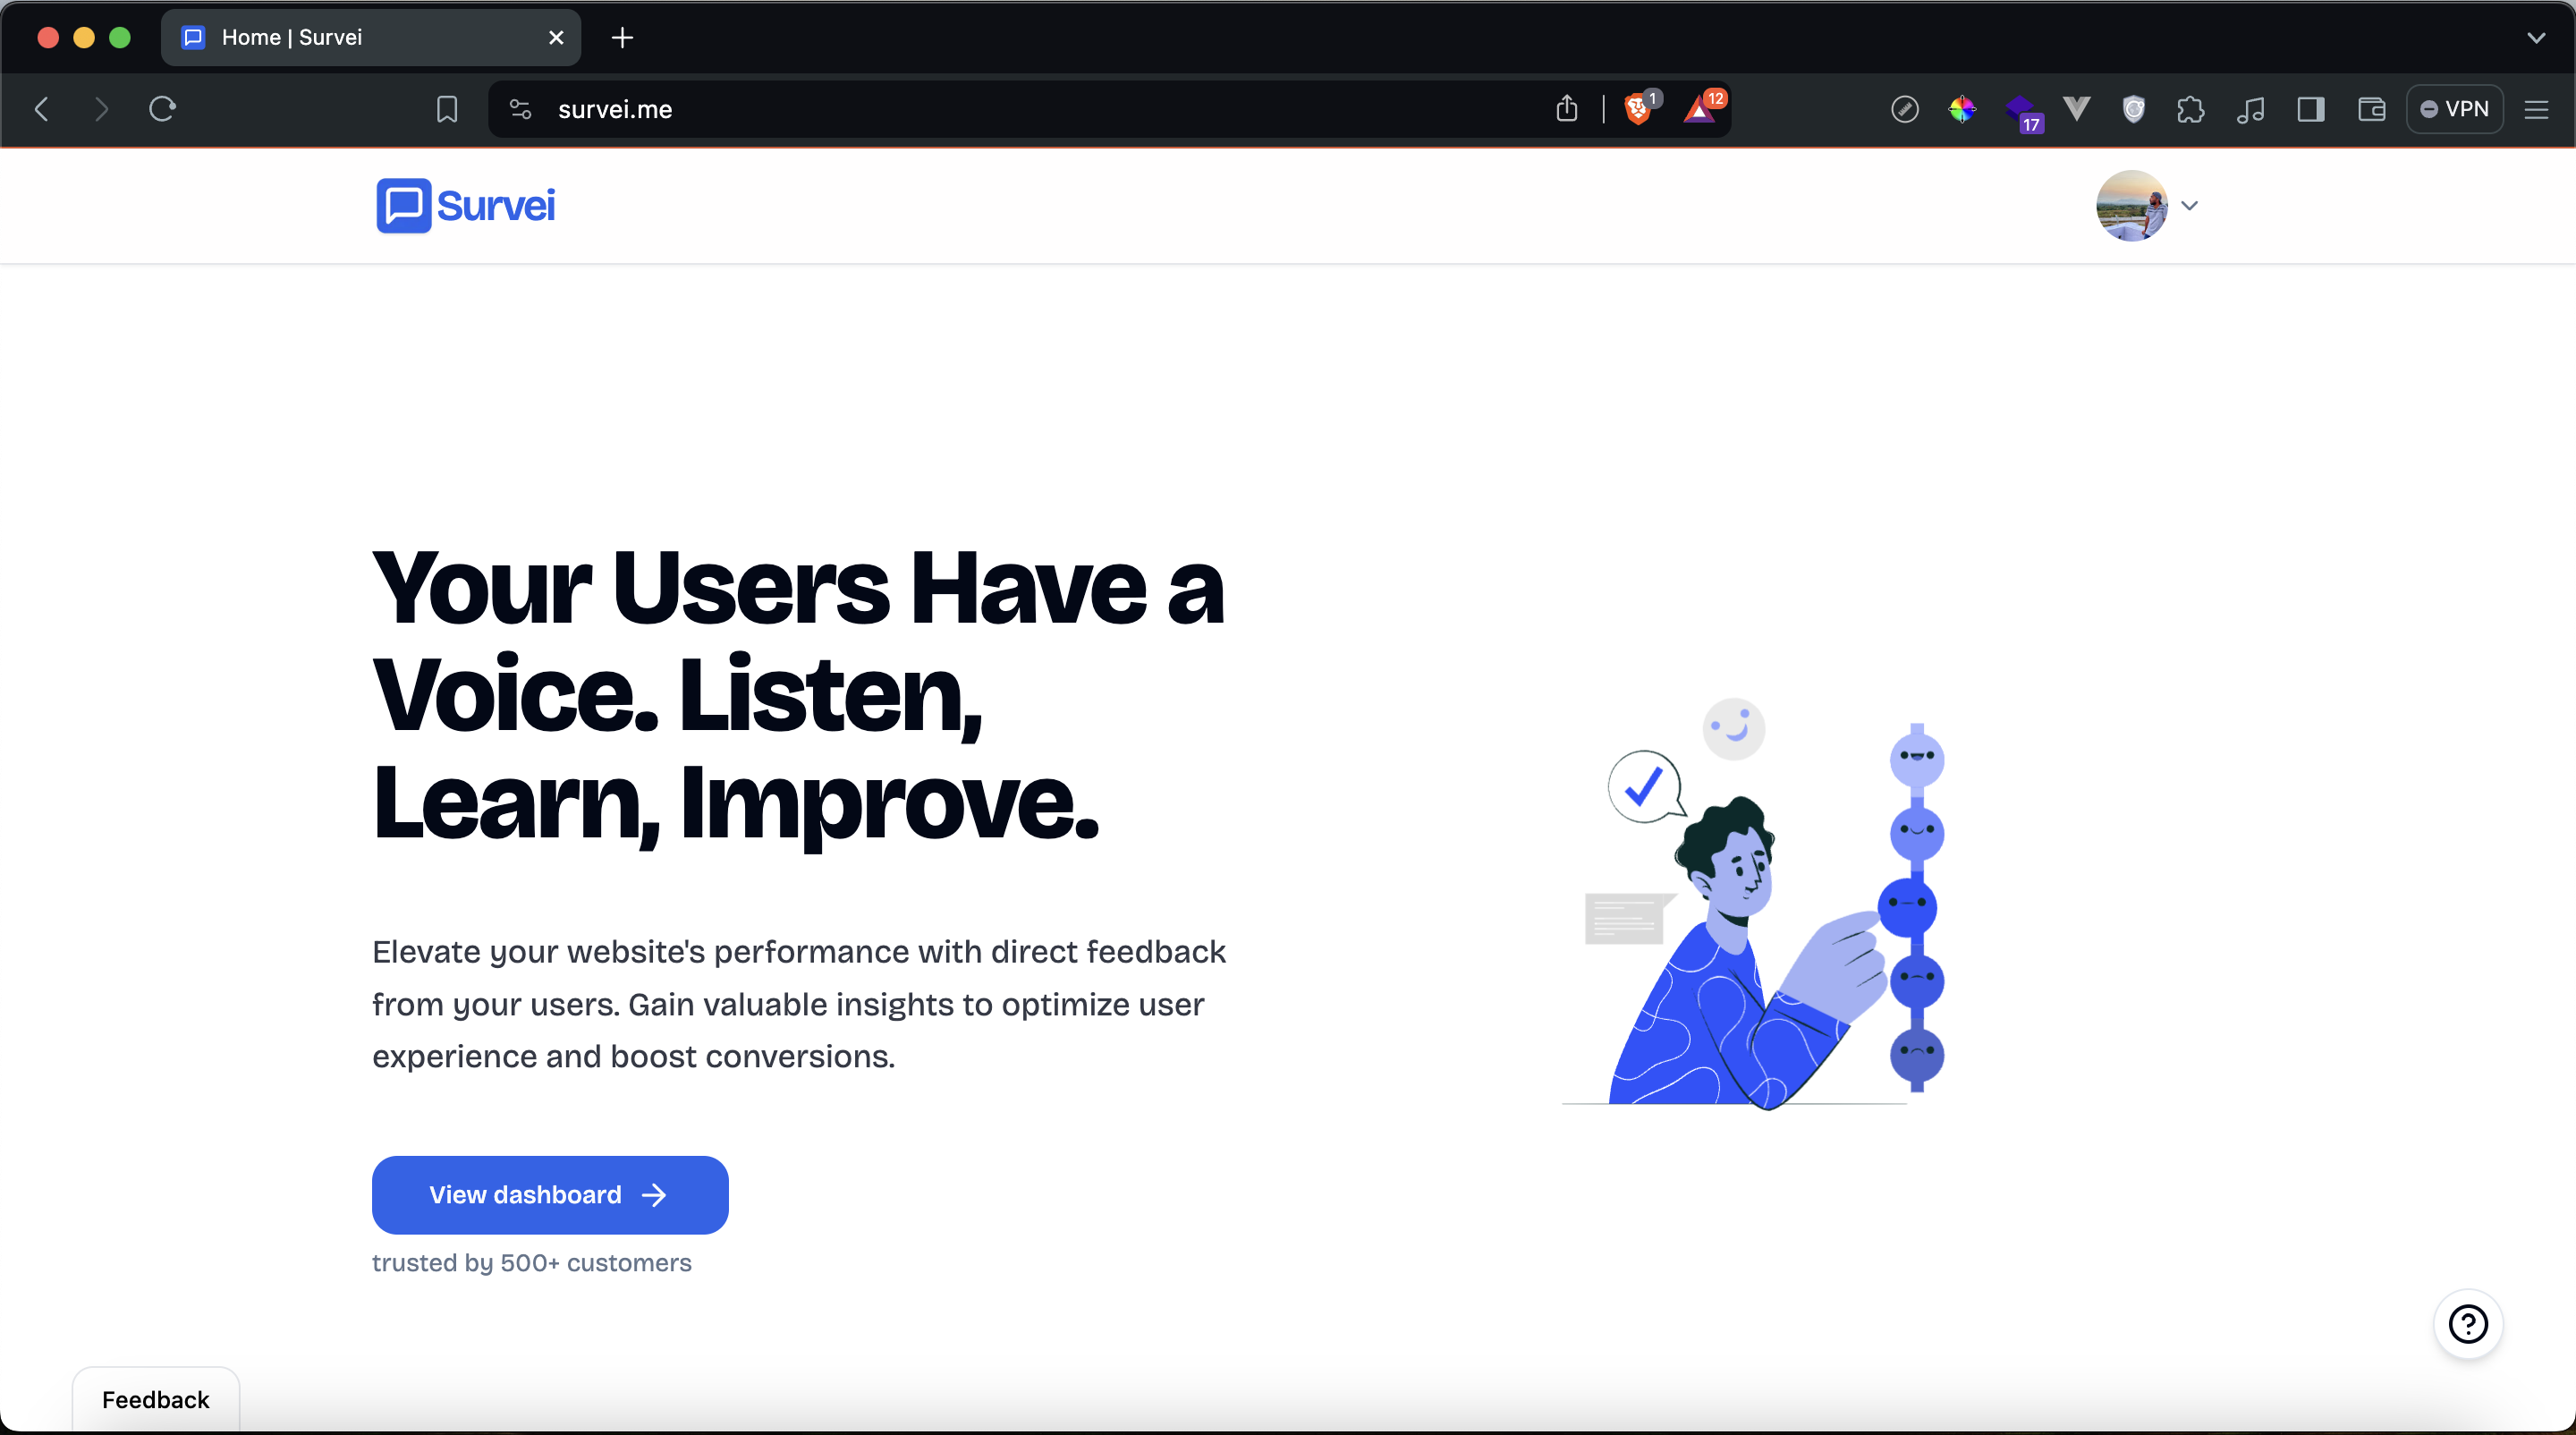 survei - Your users have a voice - listen, learn, improve